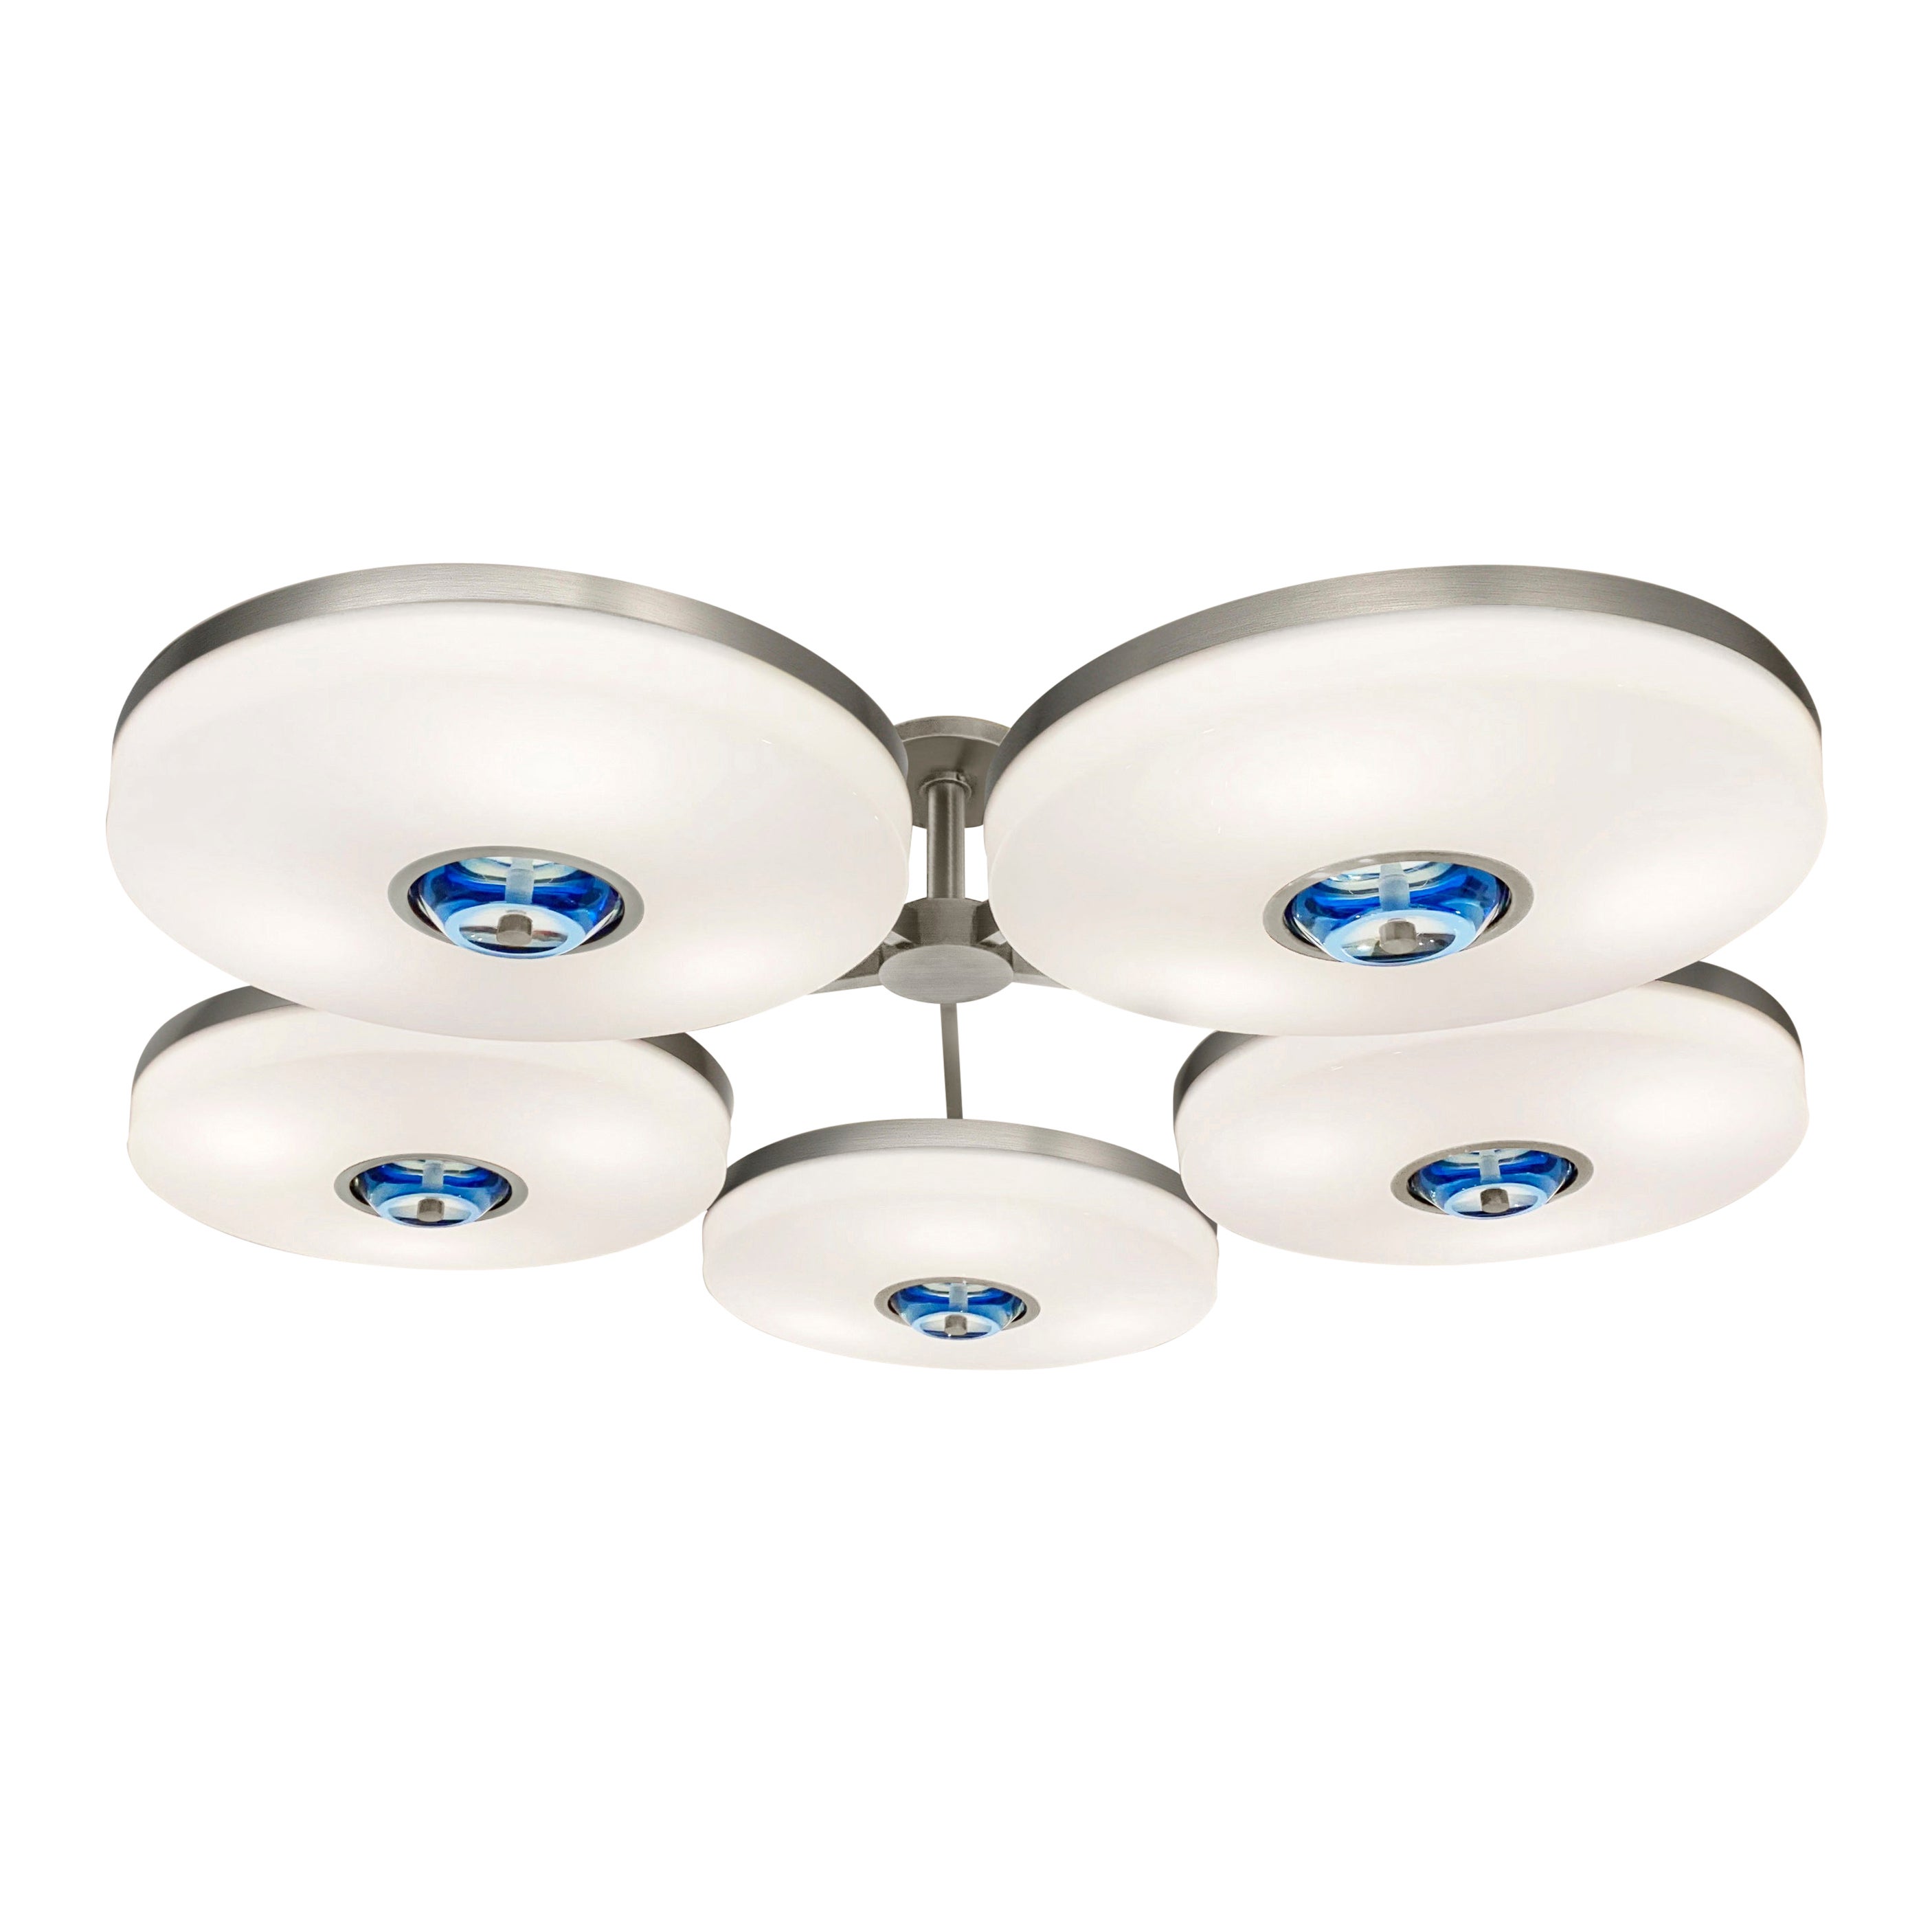 Iris N. 5 Ceiling Light by Gaspare Asaro-Satin Nickel Finish For Sale